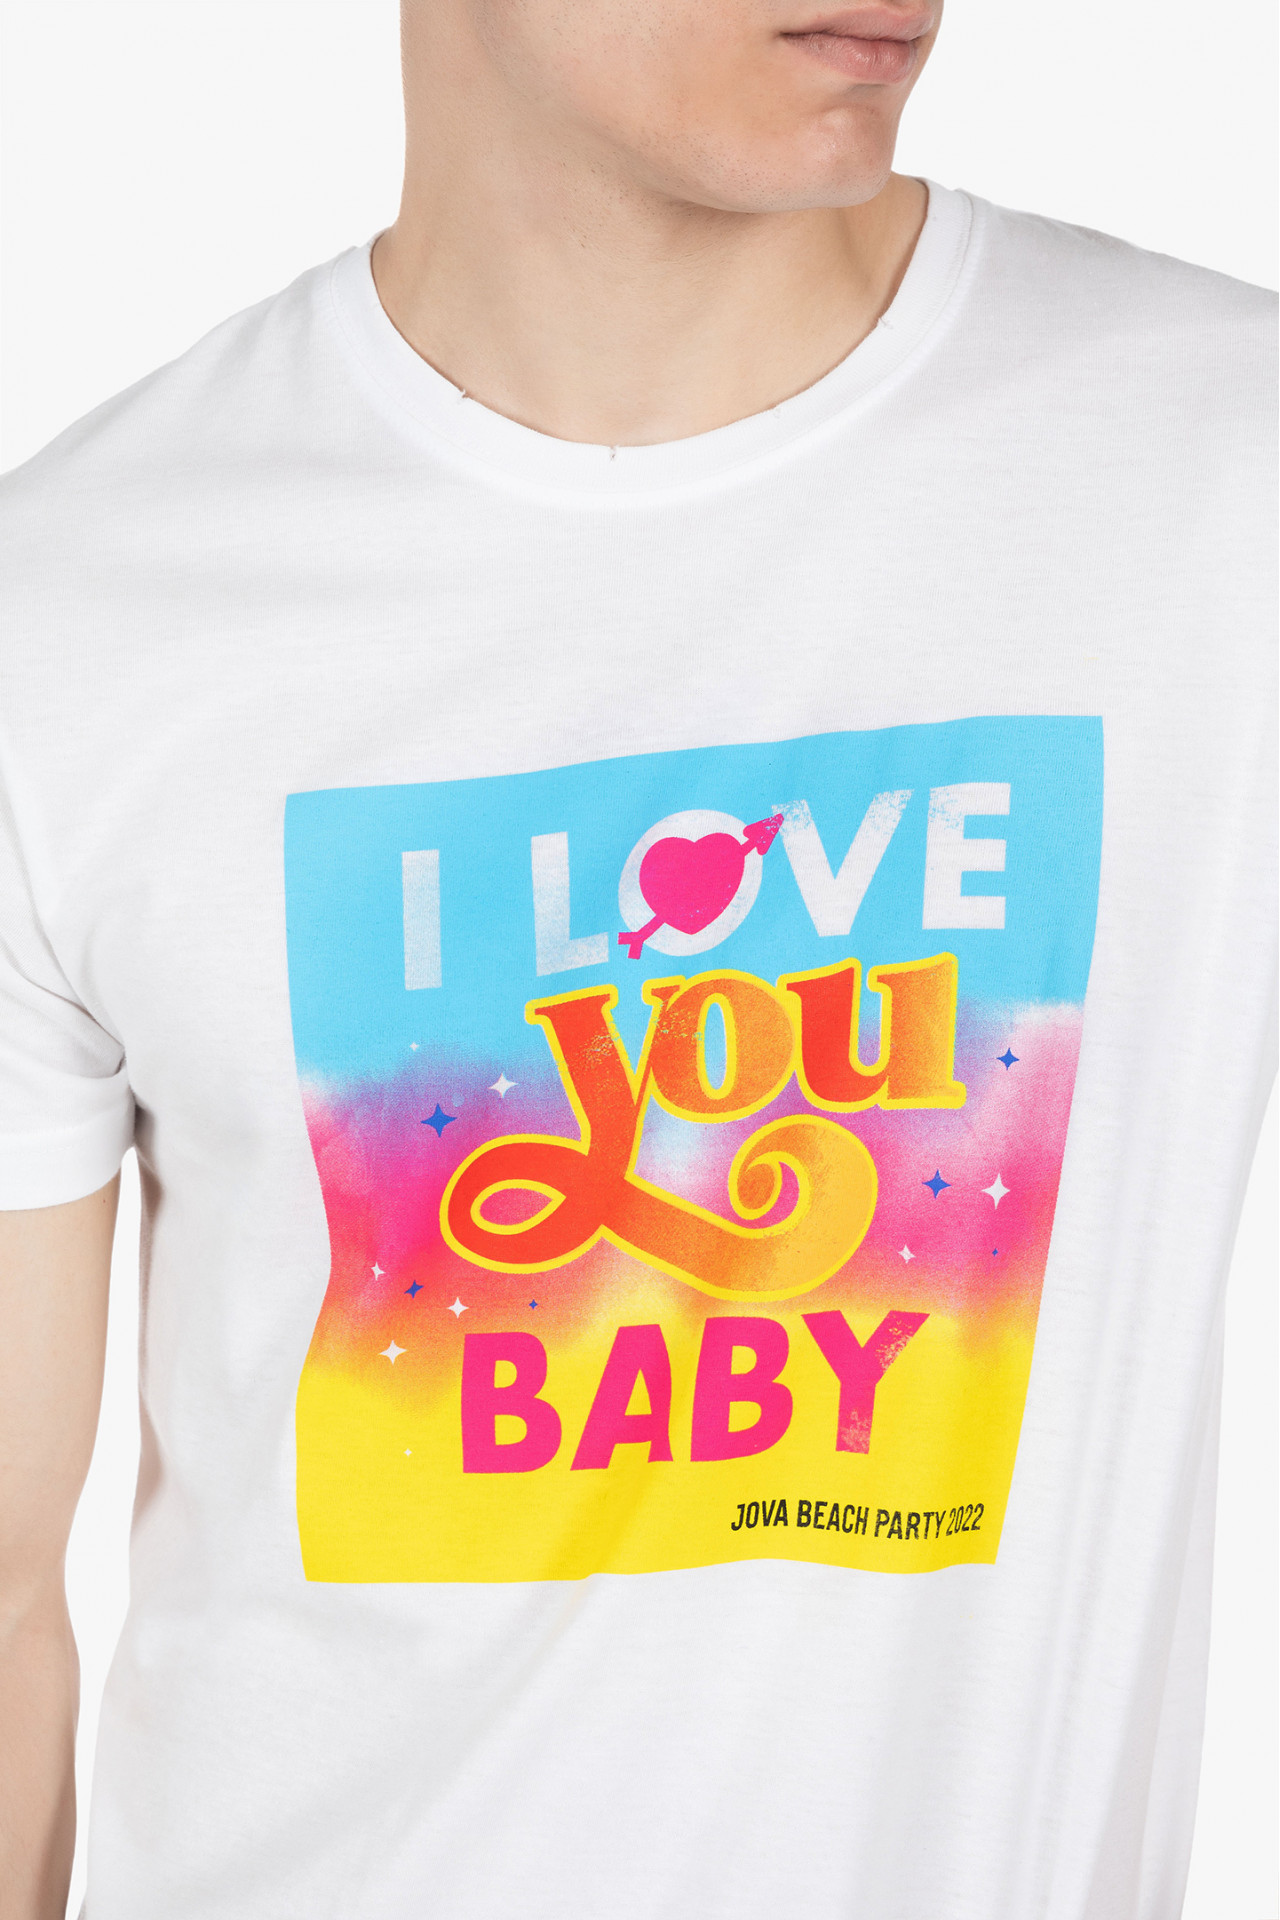 vi ydre Rationel I Love You Baby" T-Shirt Jova Beach Party 2022